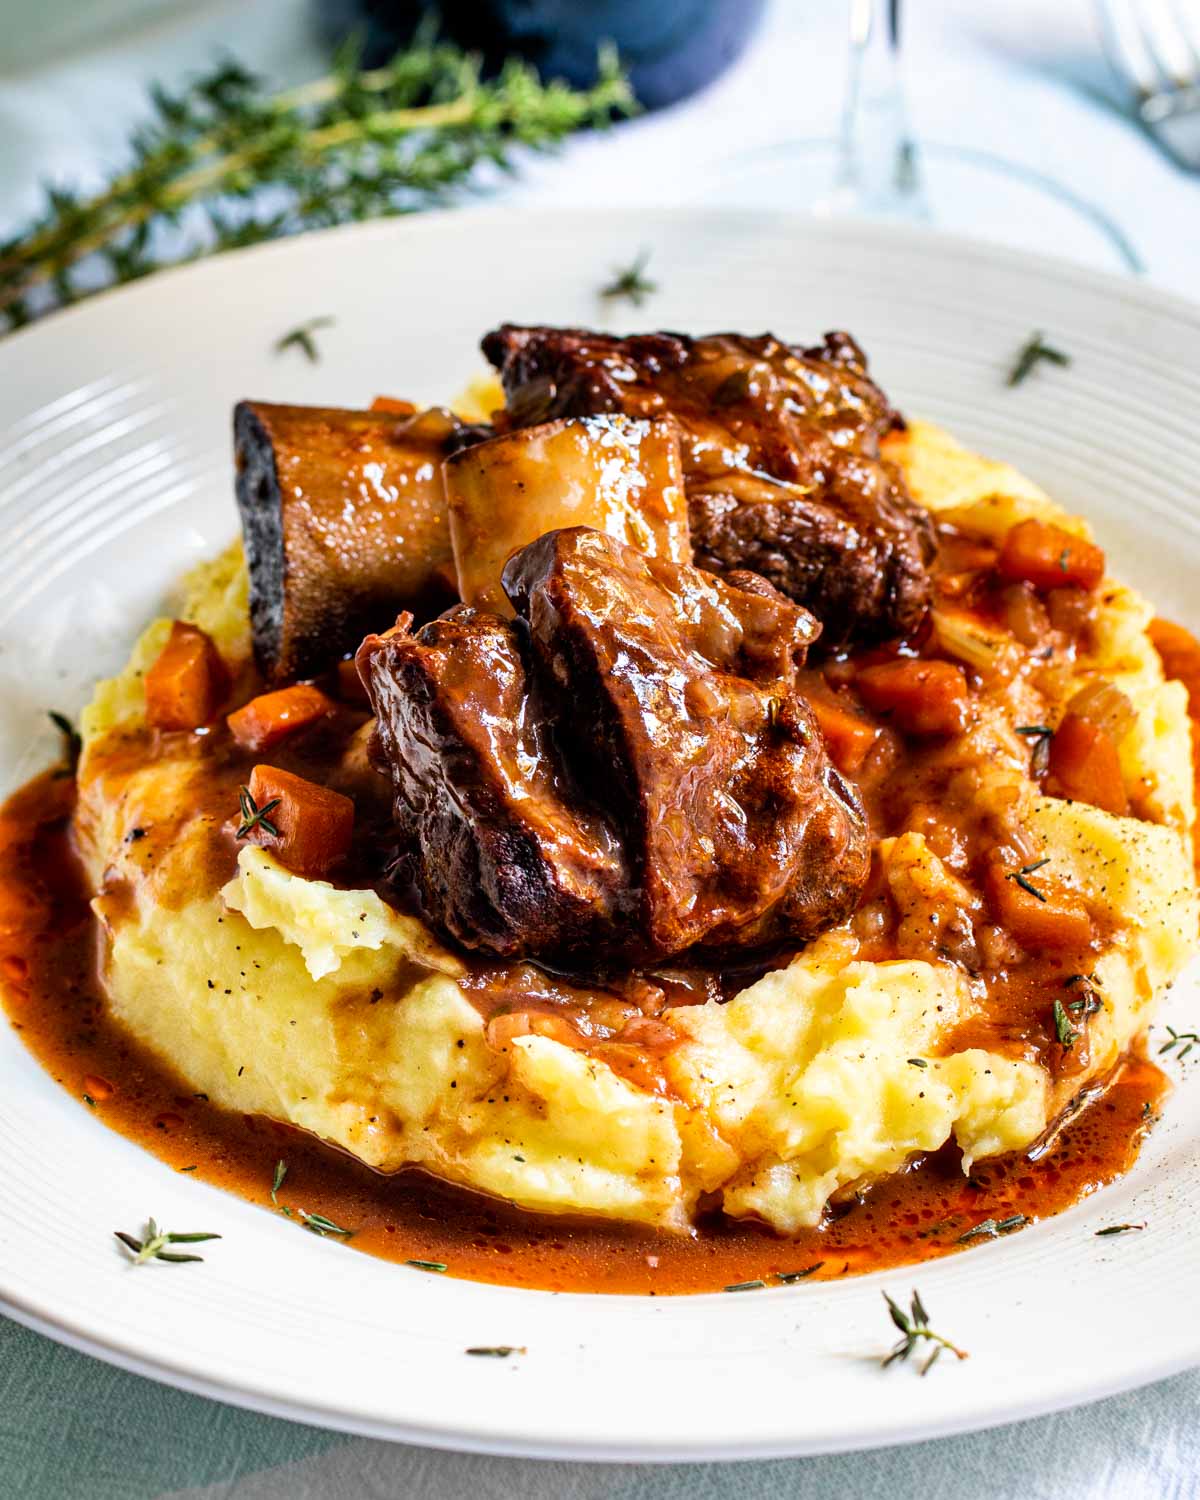 2 beef short ribs on a bed of mashed potatoes.